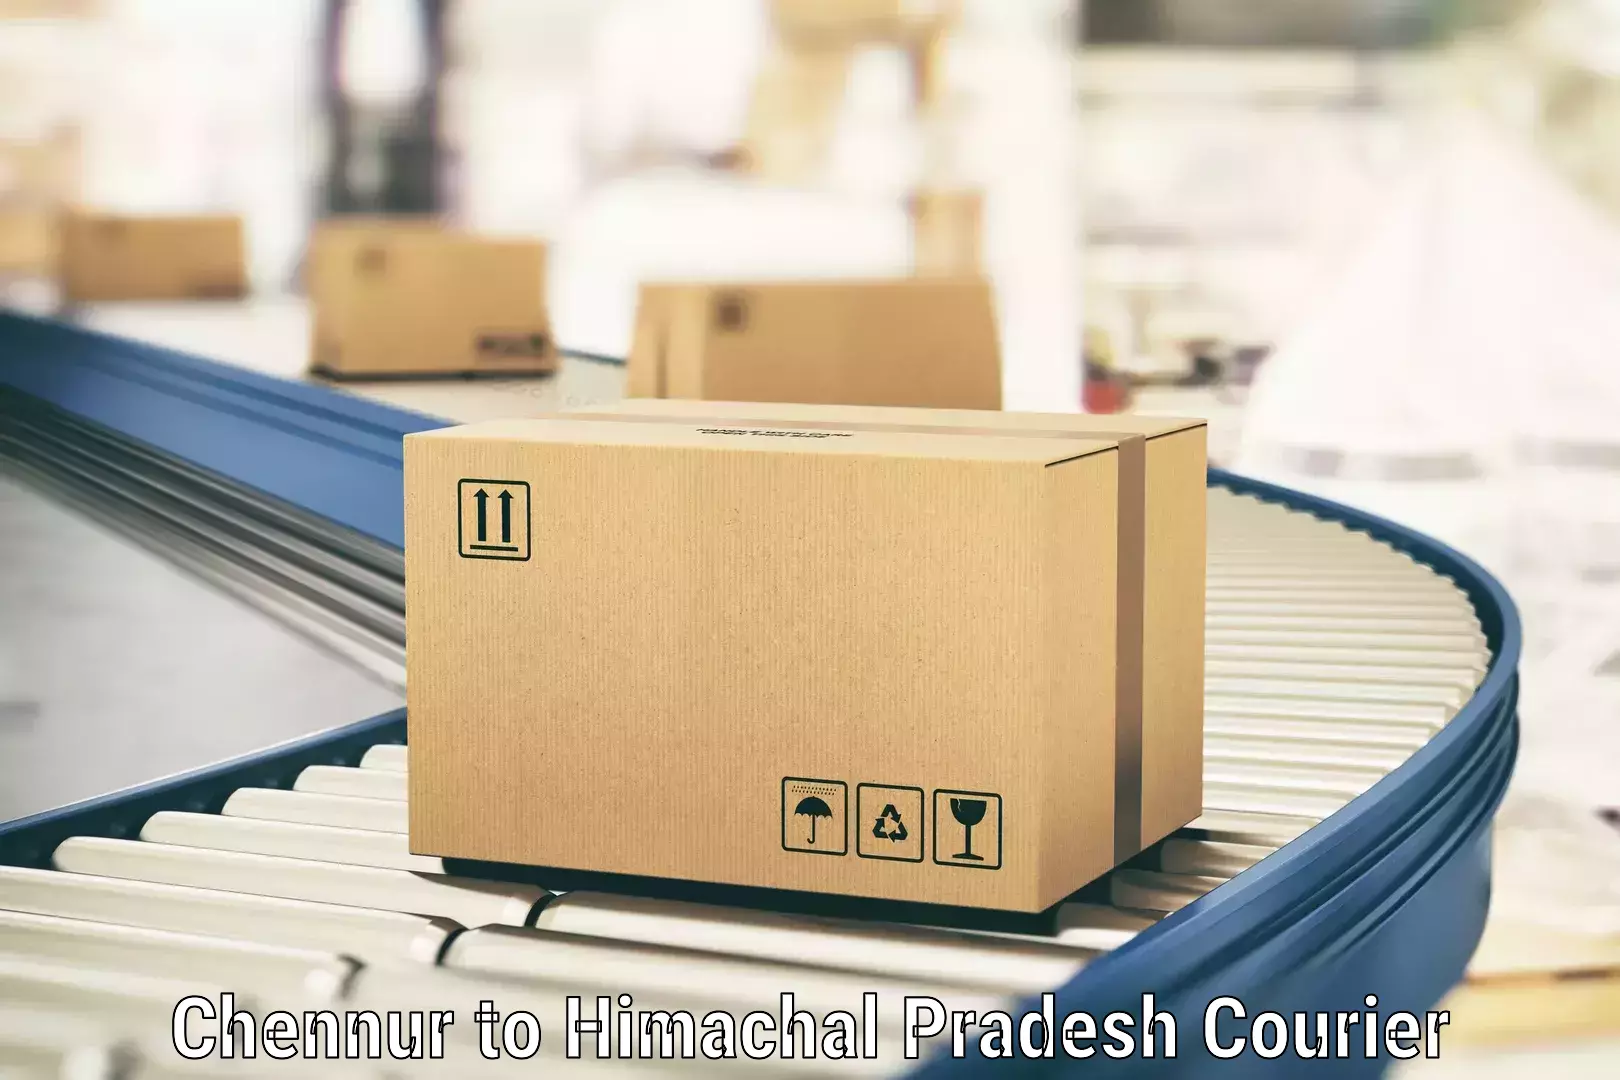 On-call courier service Chennur to IIT Mandi